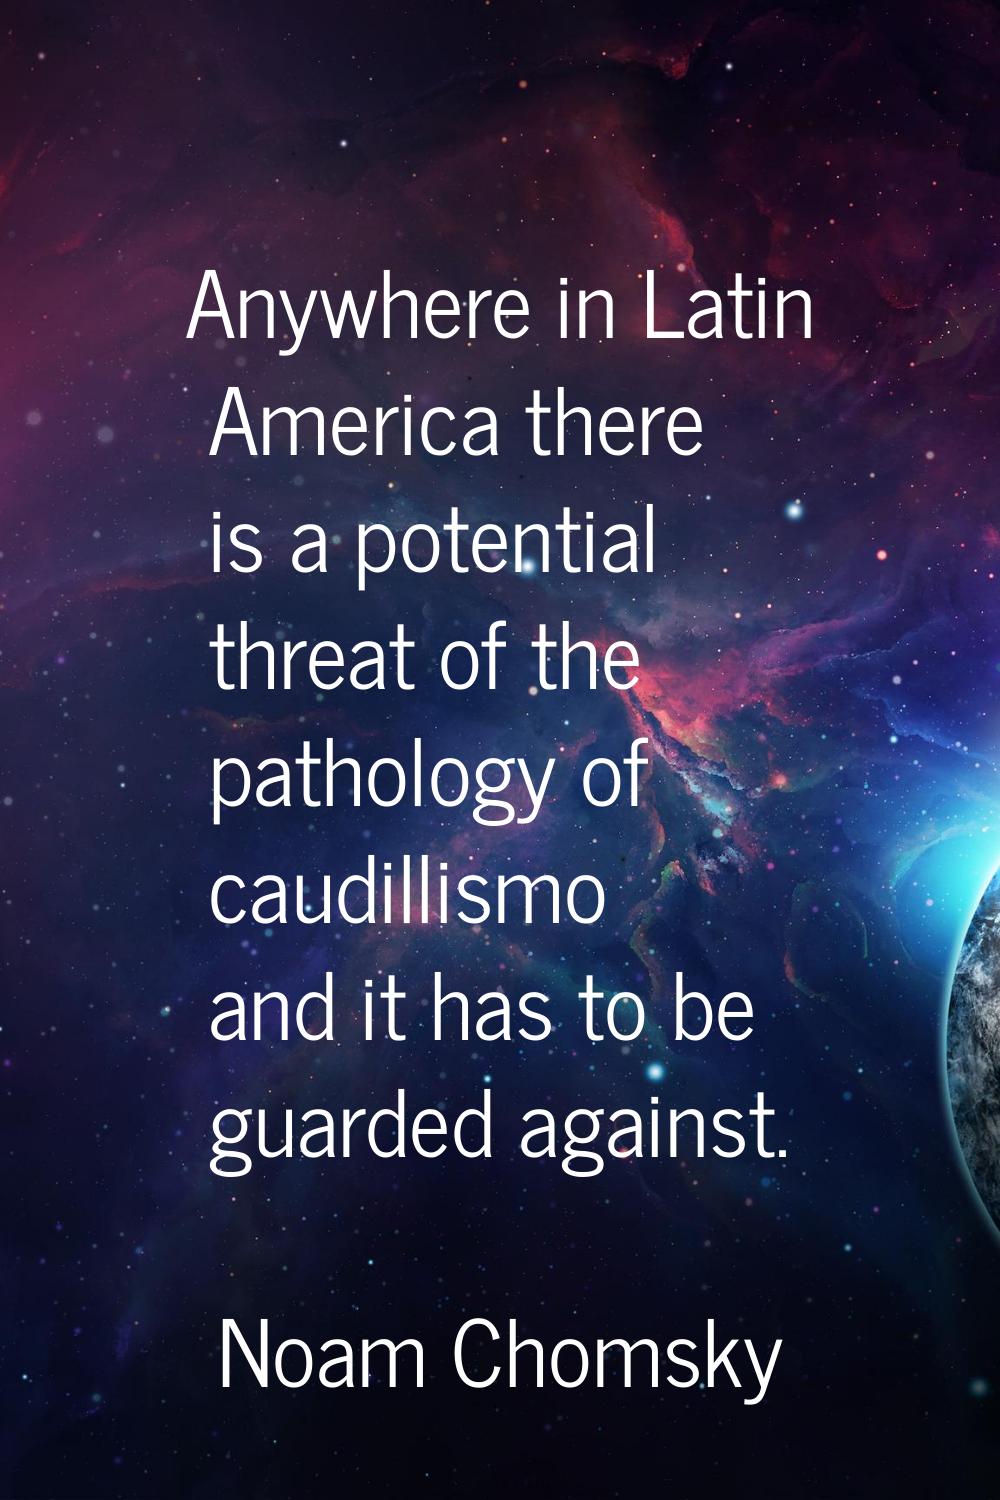 Anywhere in Latin America there is a potential threat of the pathology of caudillismo and it has to